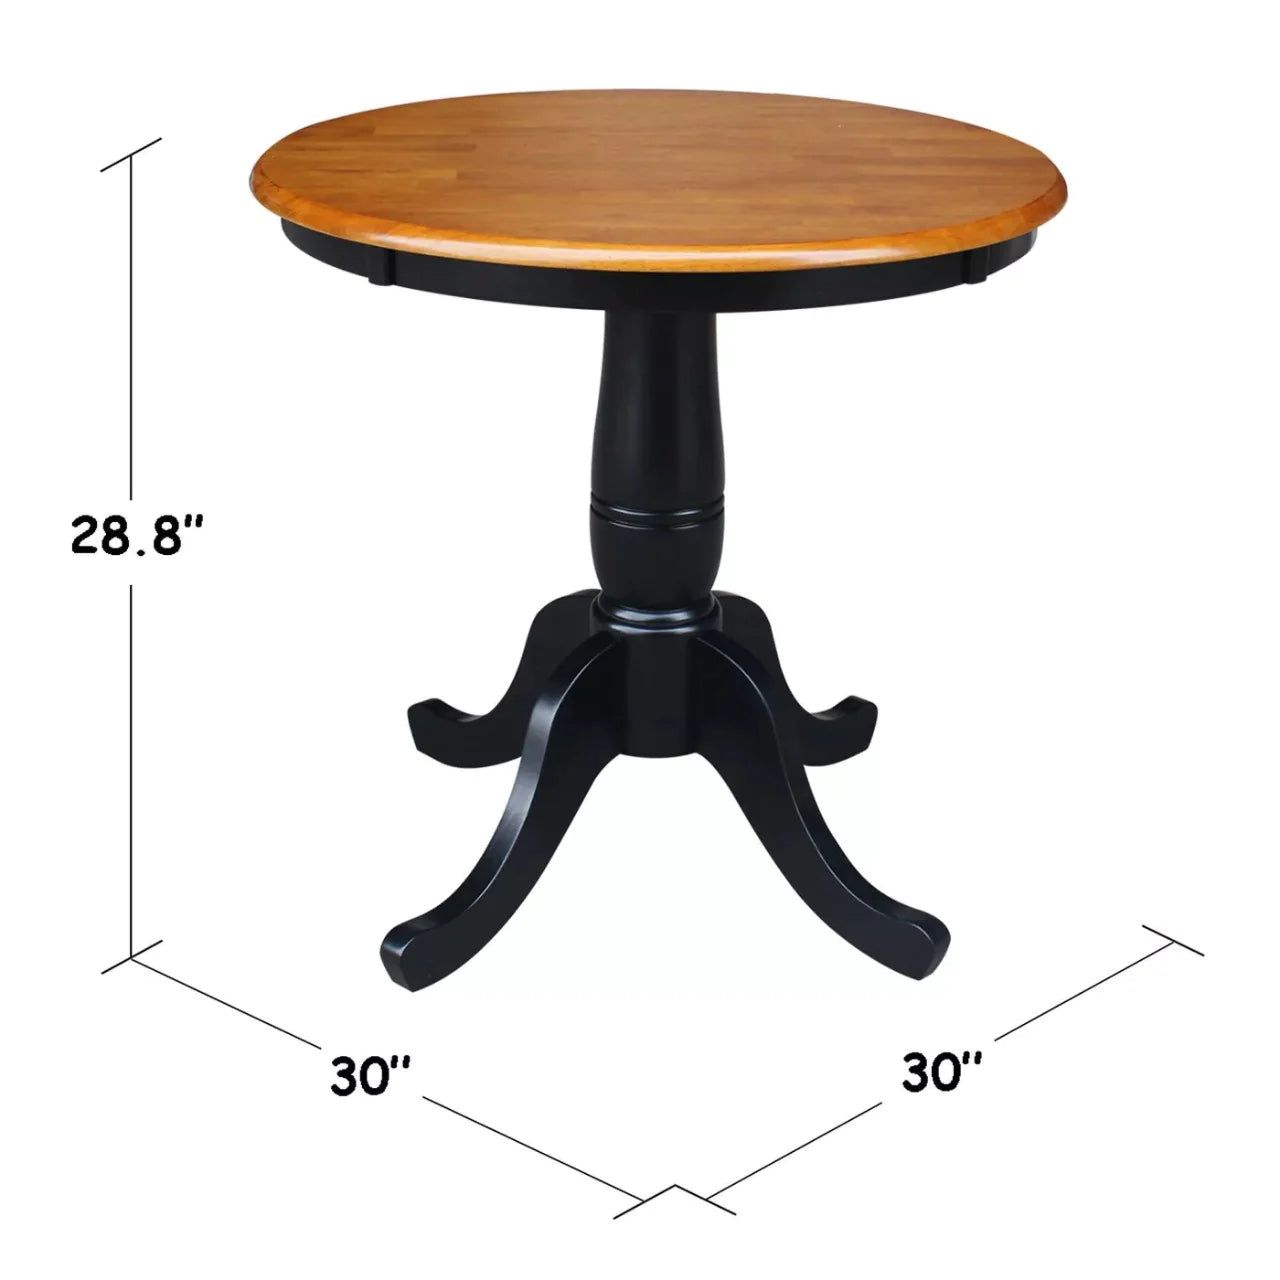 Dining Set: 3 Piece Round Dining Table with 2 X-Back Chairs